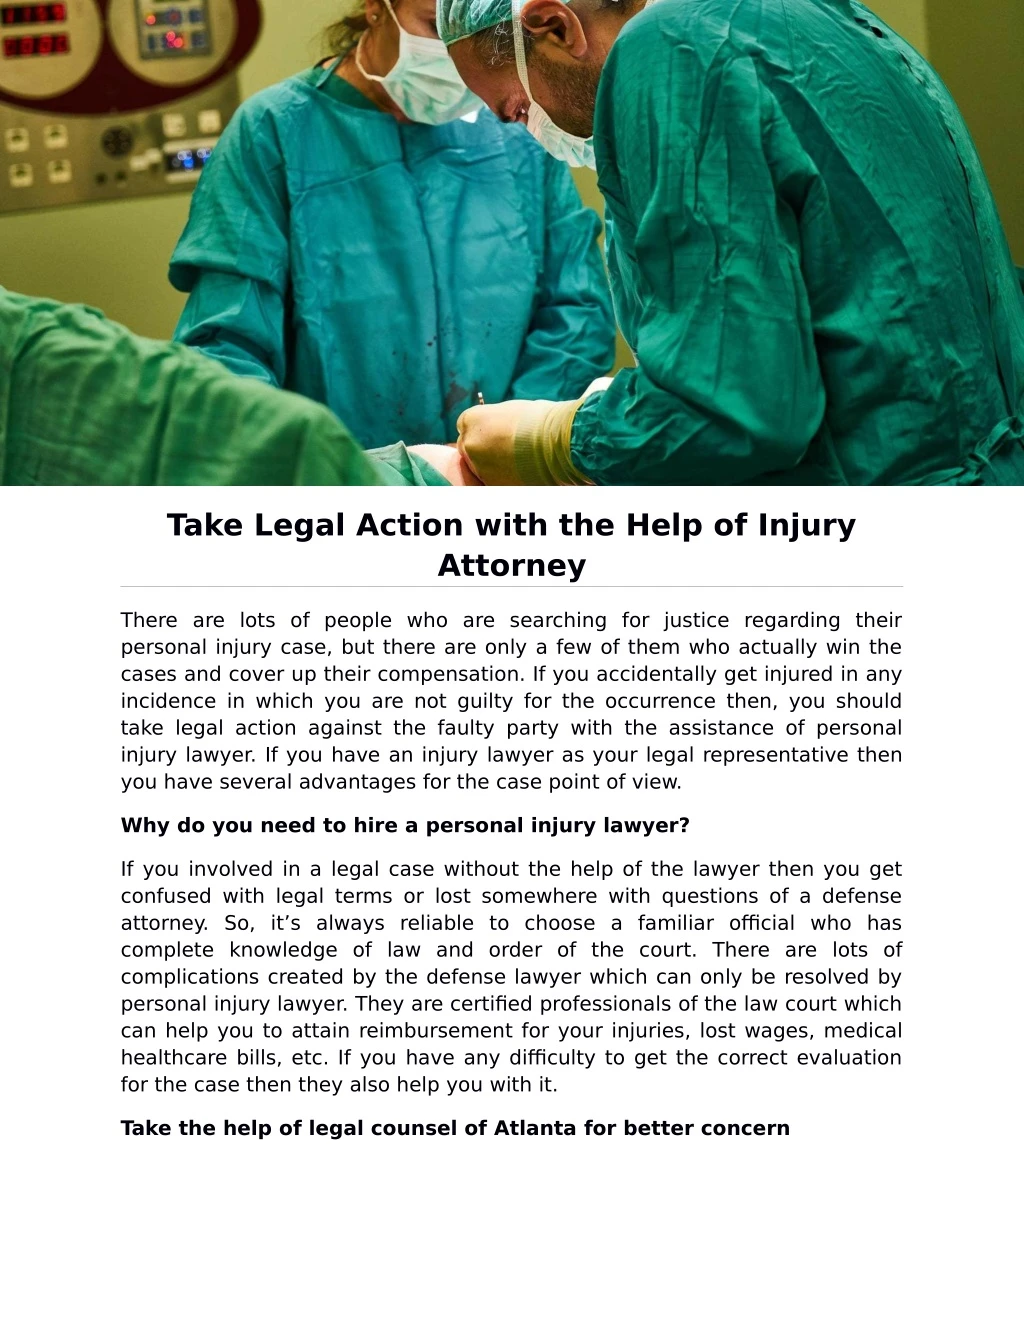 take legal action with the help of injury attorney